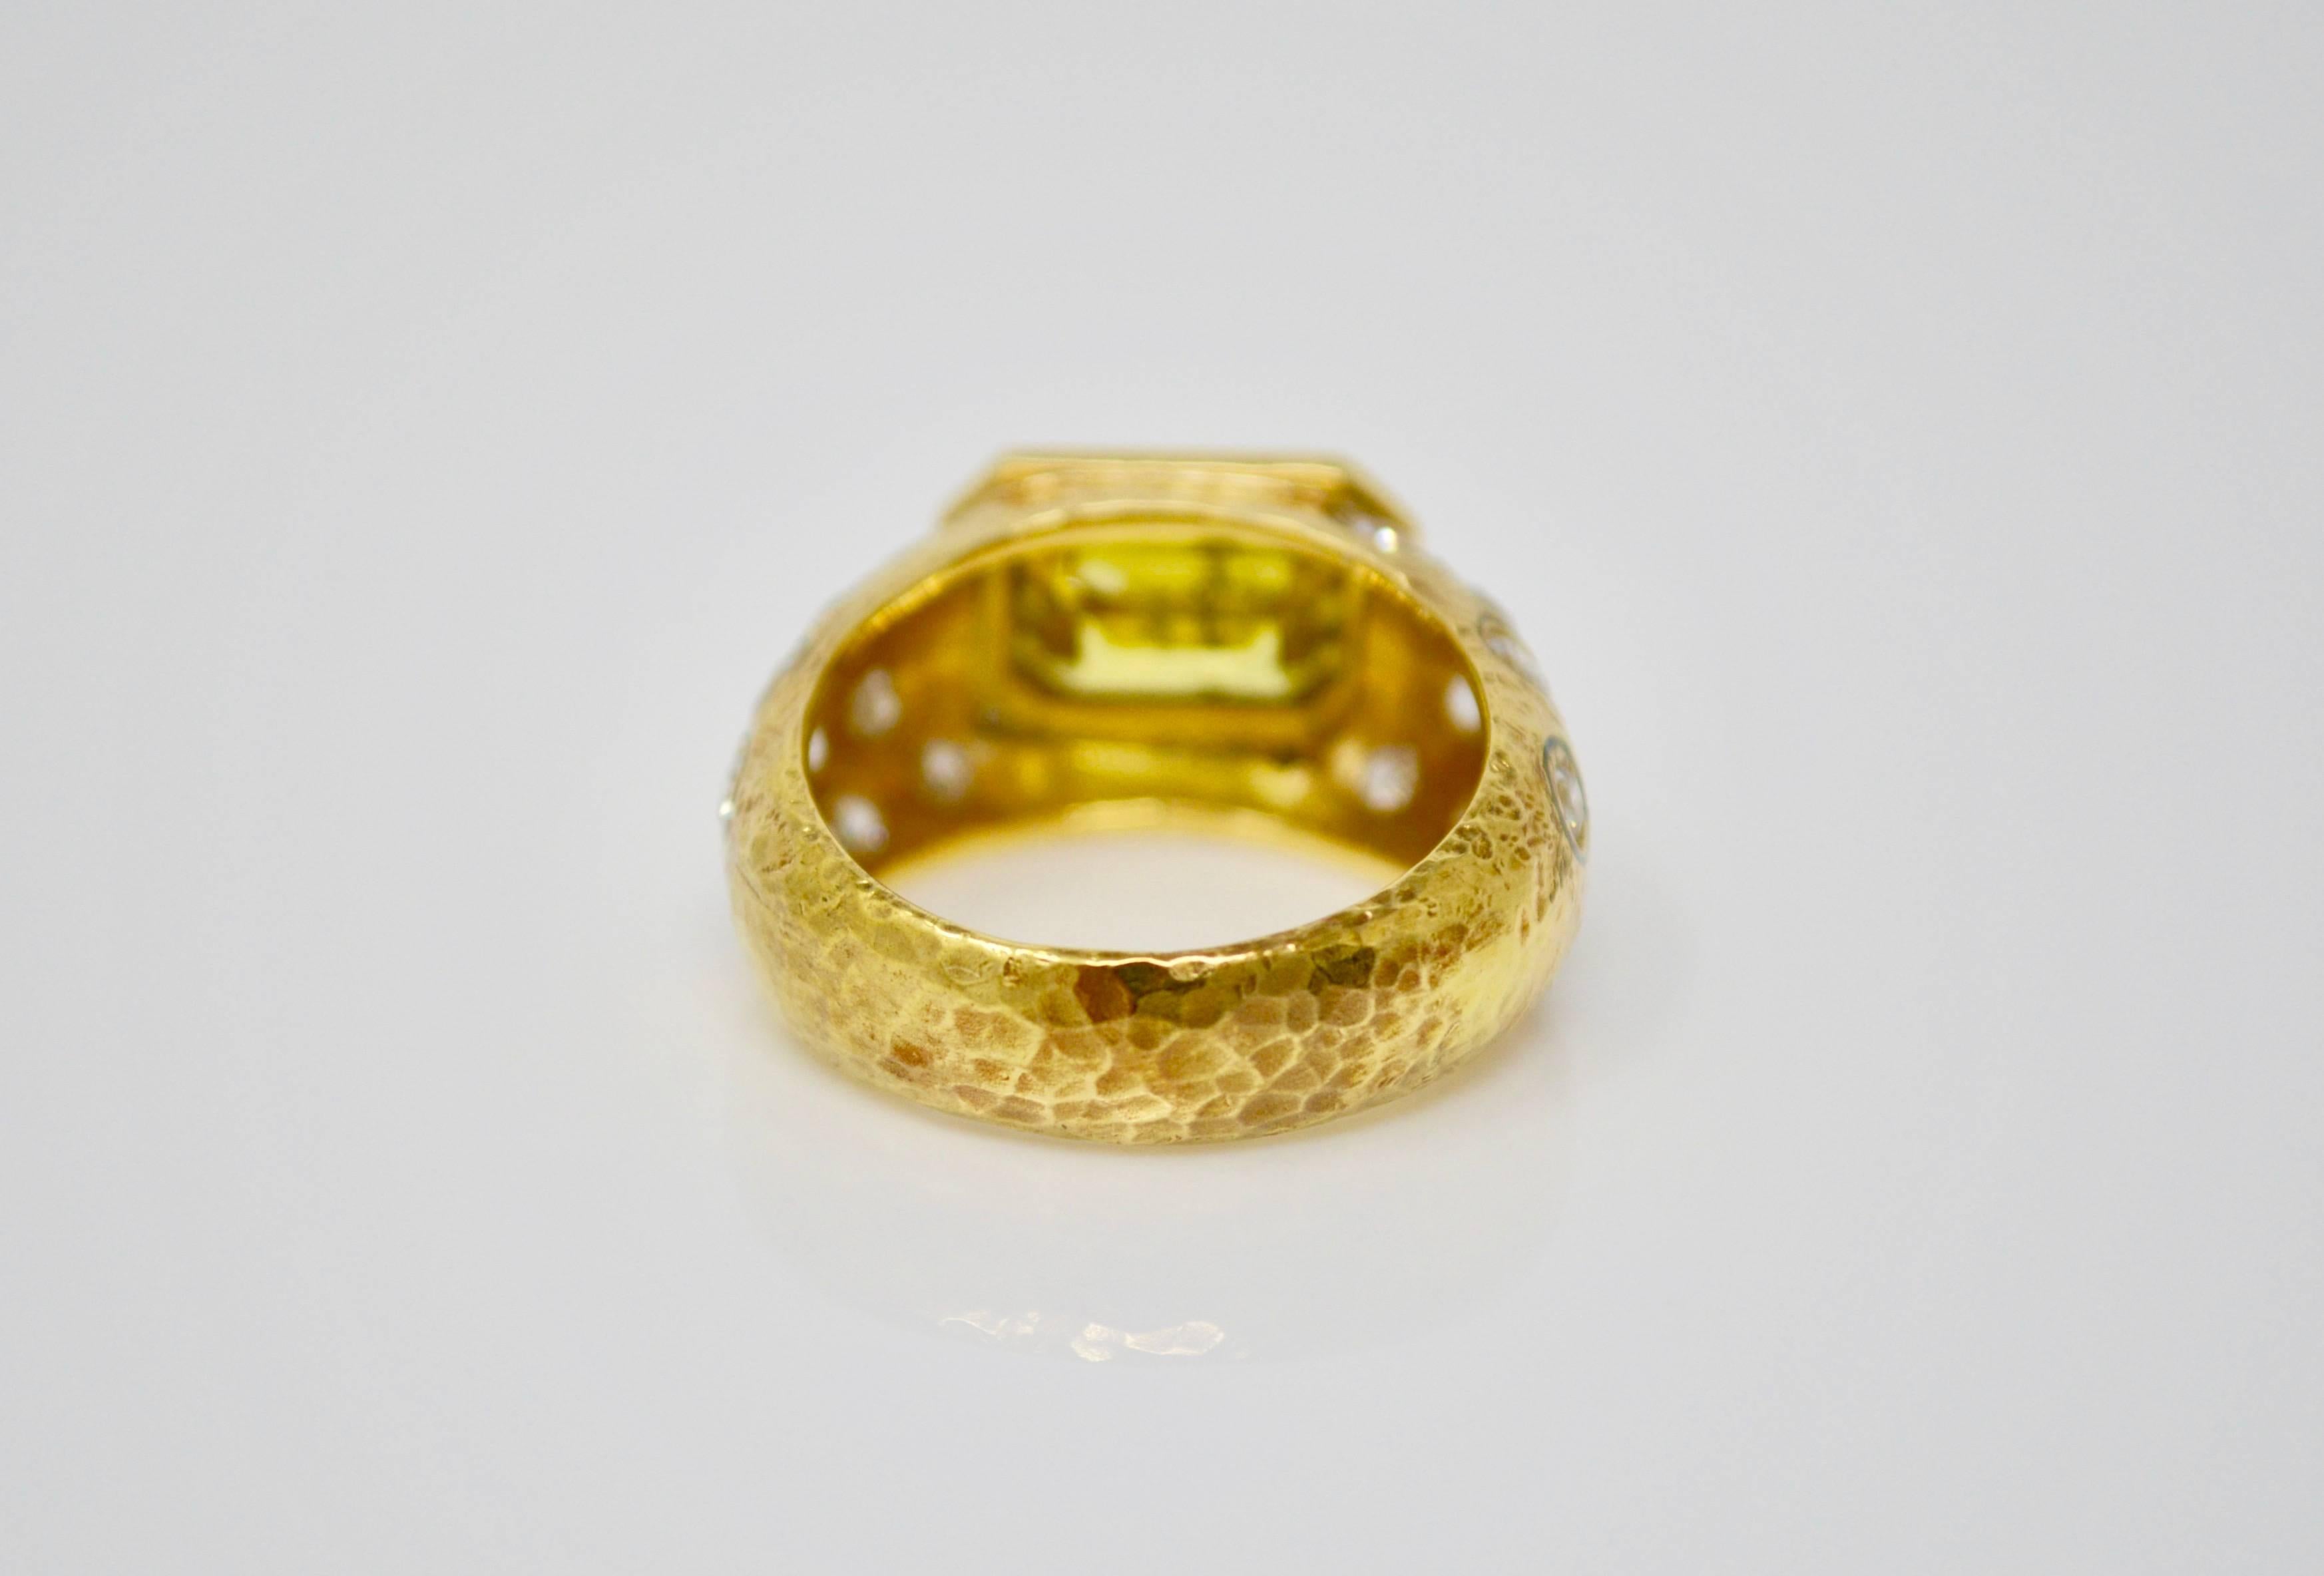 This stunning ring features a fancy deep brown yellow emerald cut diamond weighing 2.86 carat GIA certified. The ring is beautifully hand crafted in 18k yellow gold set with small white diamond to the gallery. 